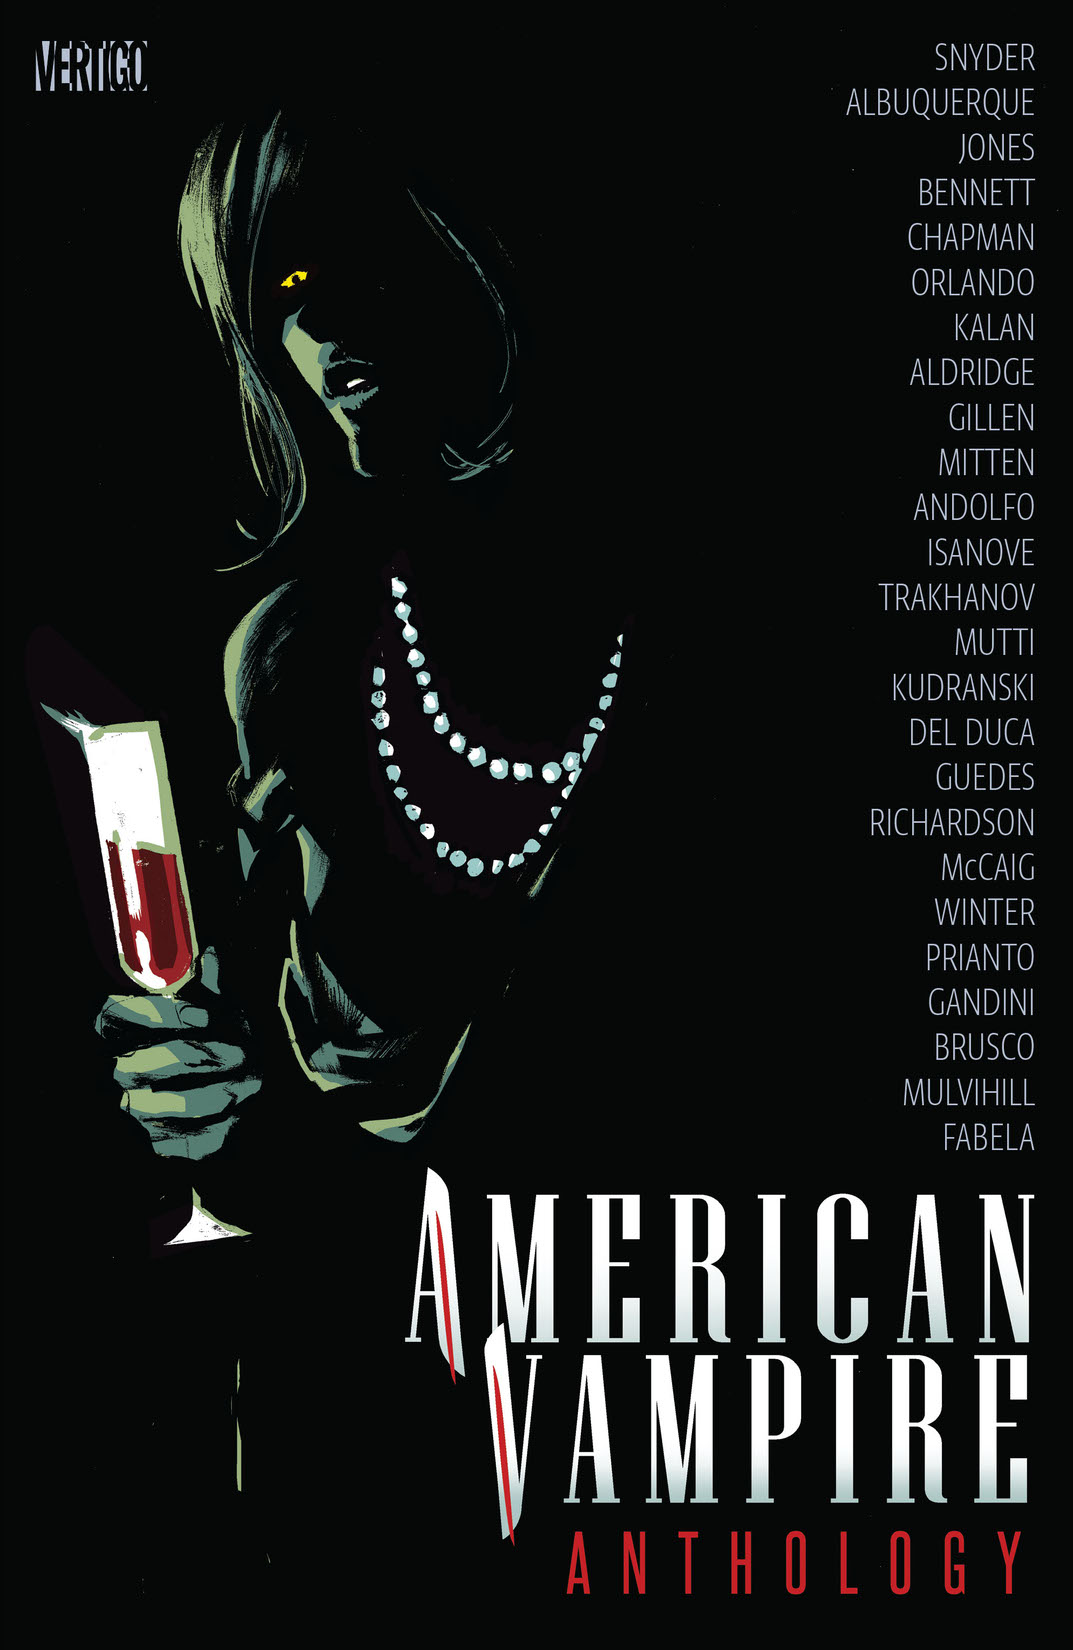 American Vampire: Anthology #2 preview images